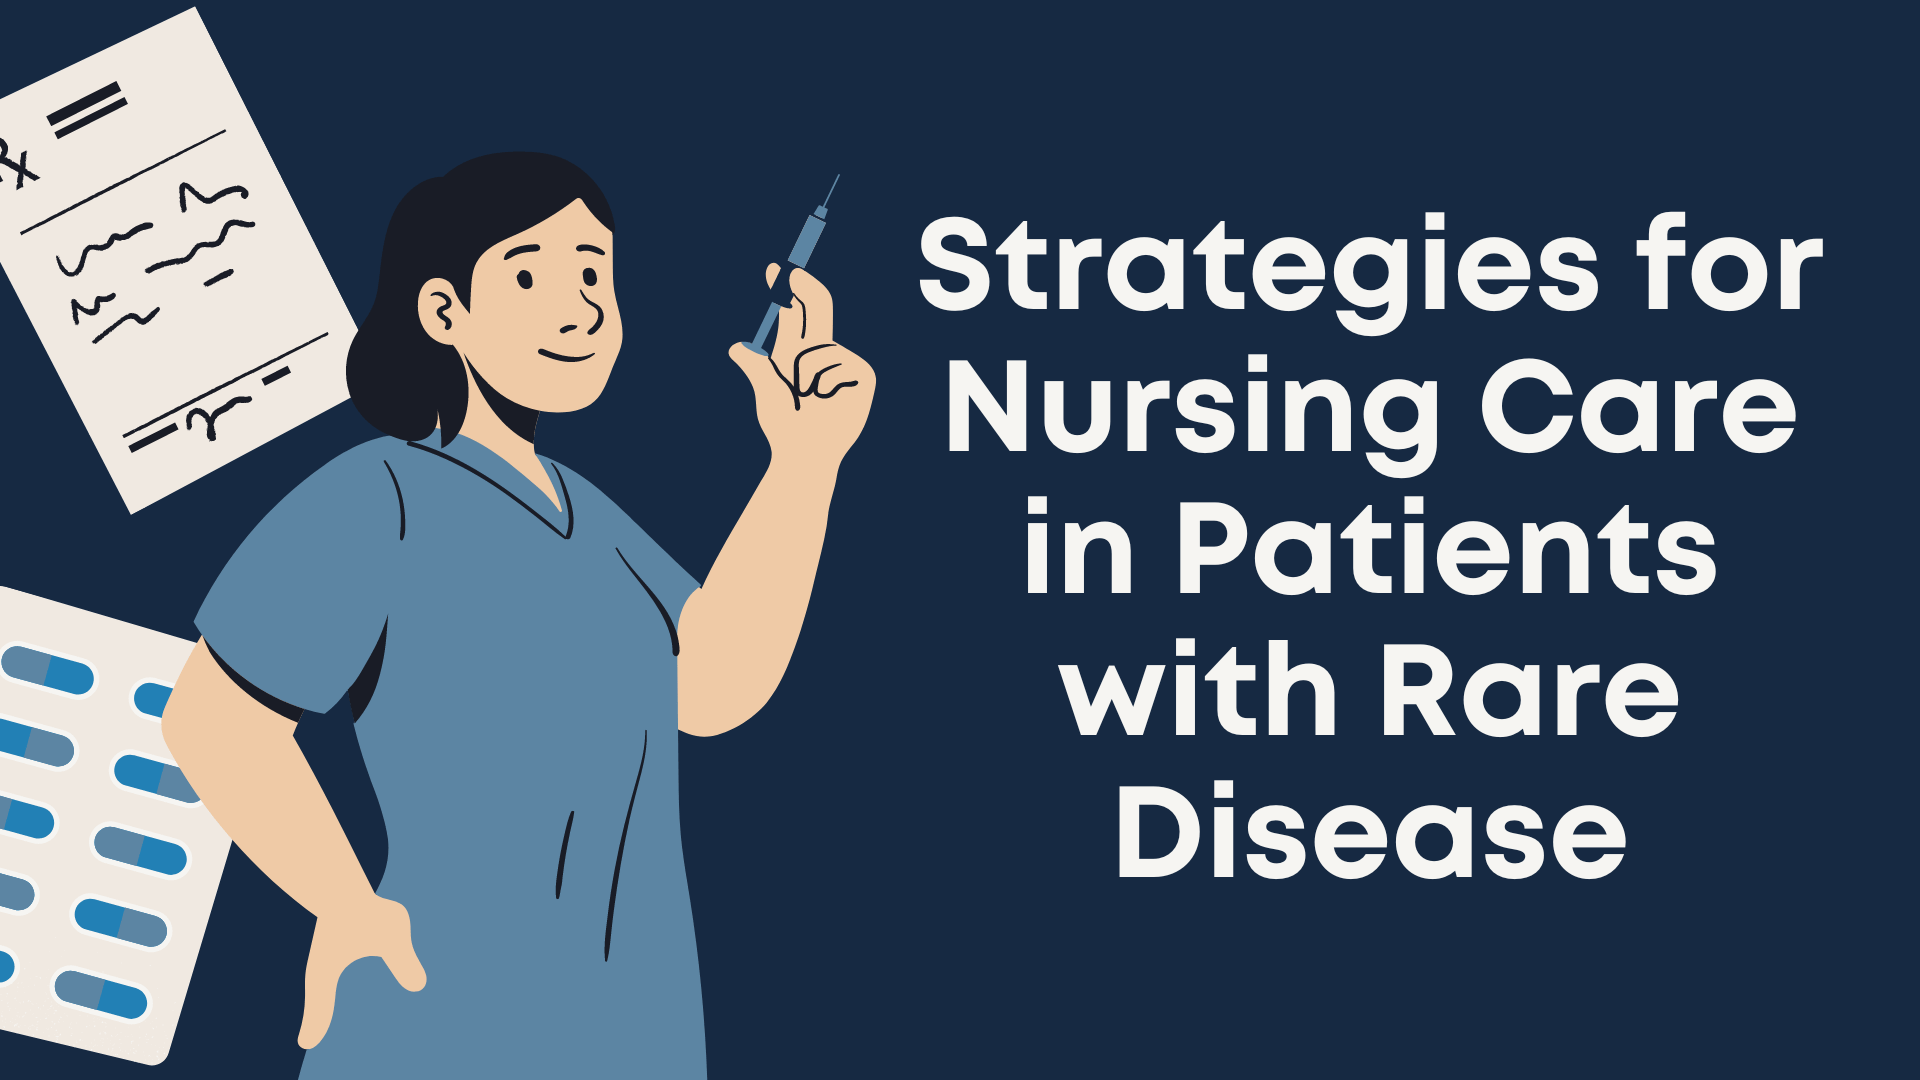 Strategies for Nursing Care in Patients with Rare Disease